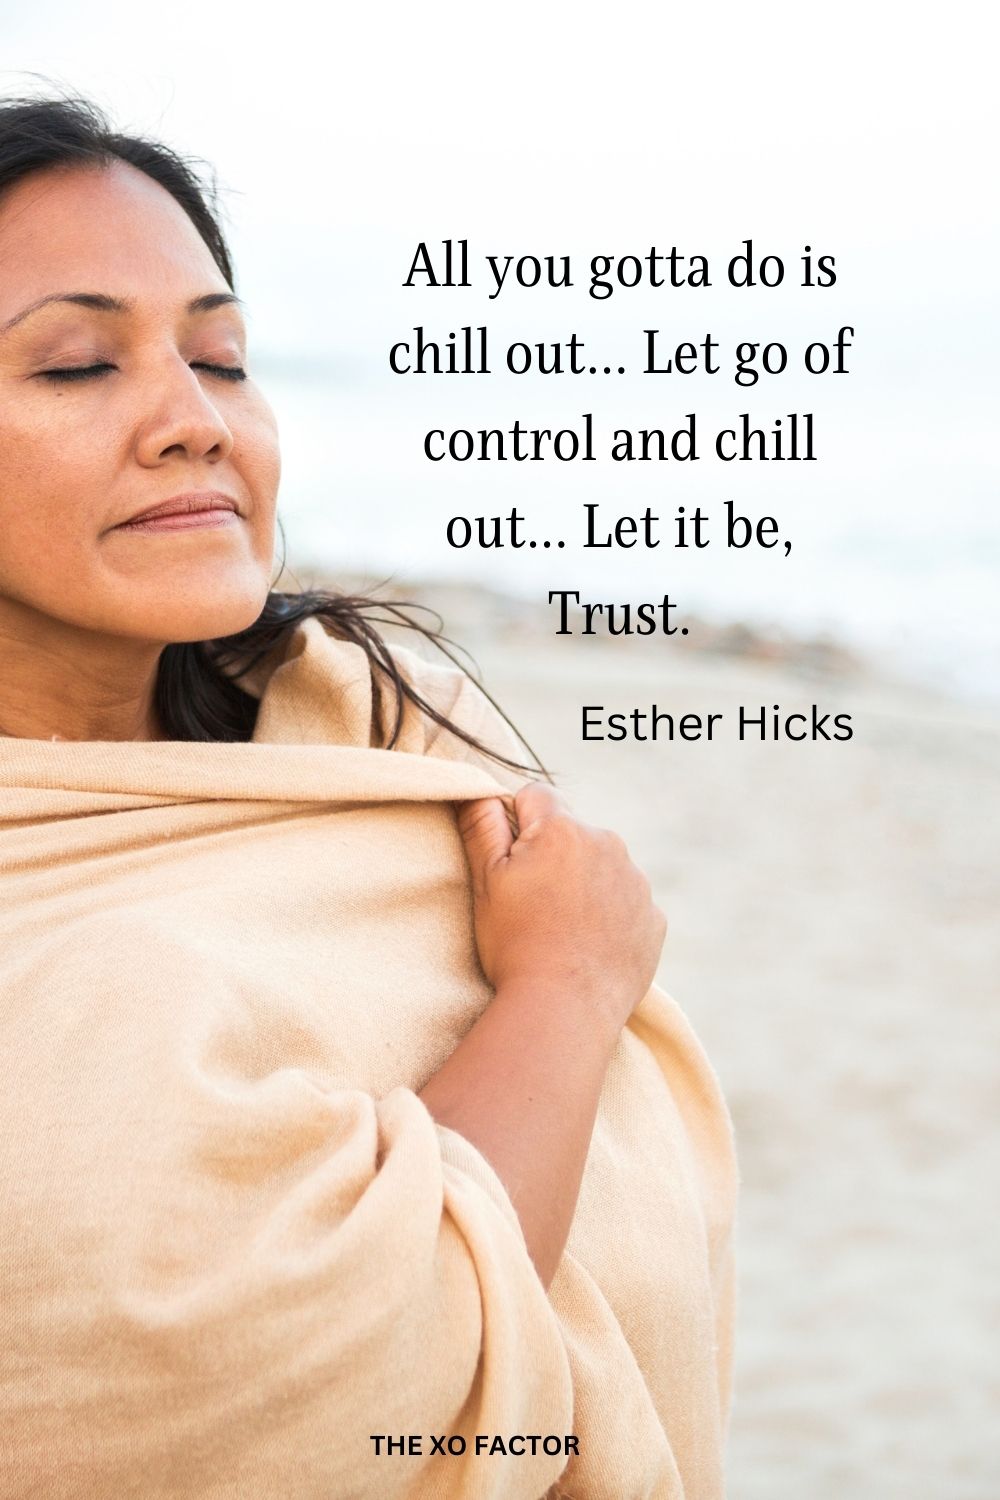 All you gotta do is chill out... Let go of control and chill out... Let it be, Trust.
Esther Hicks